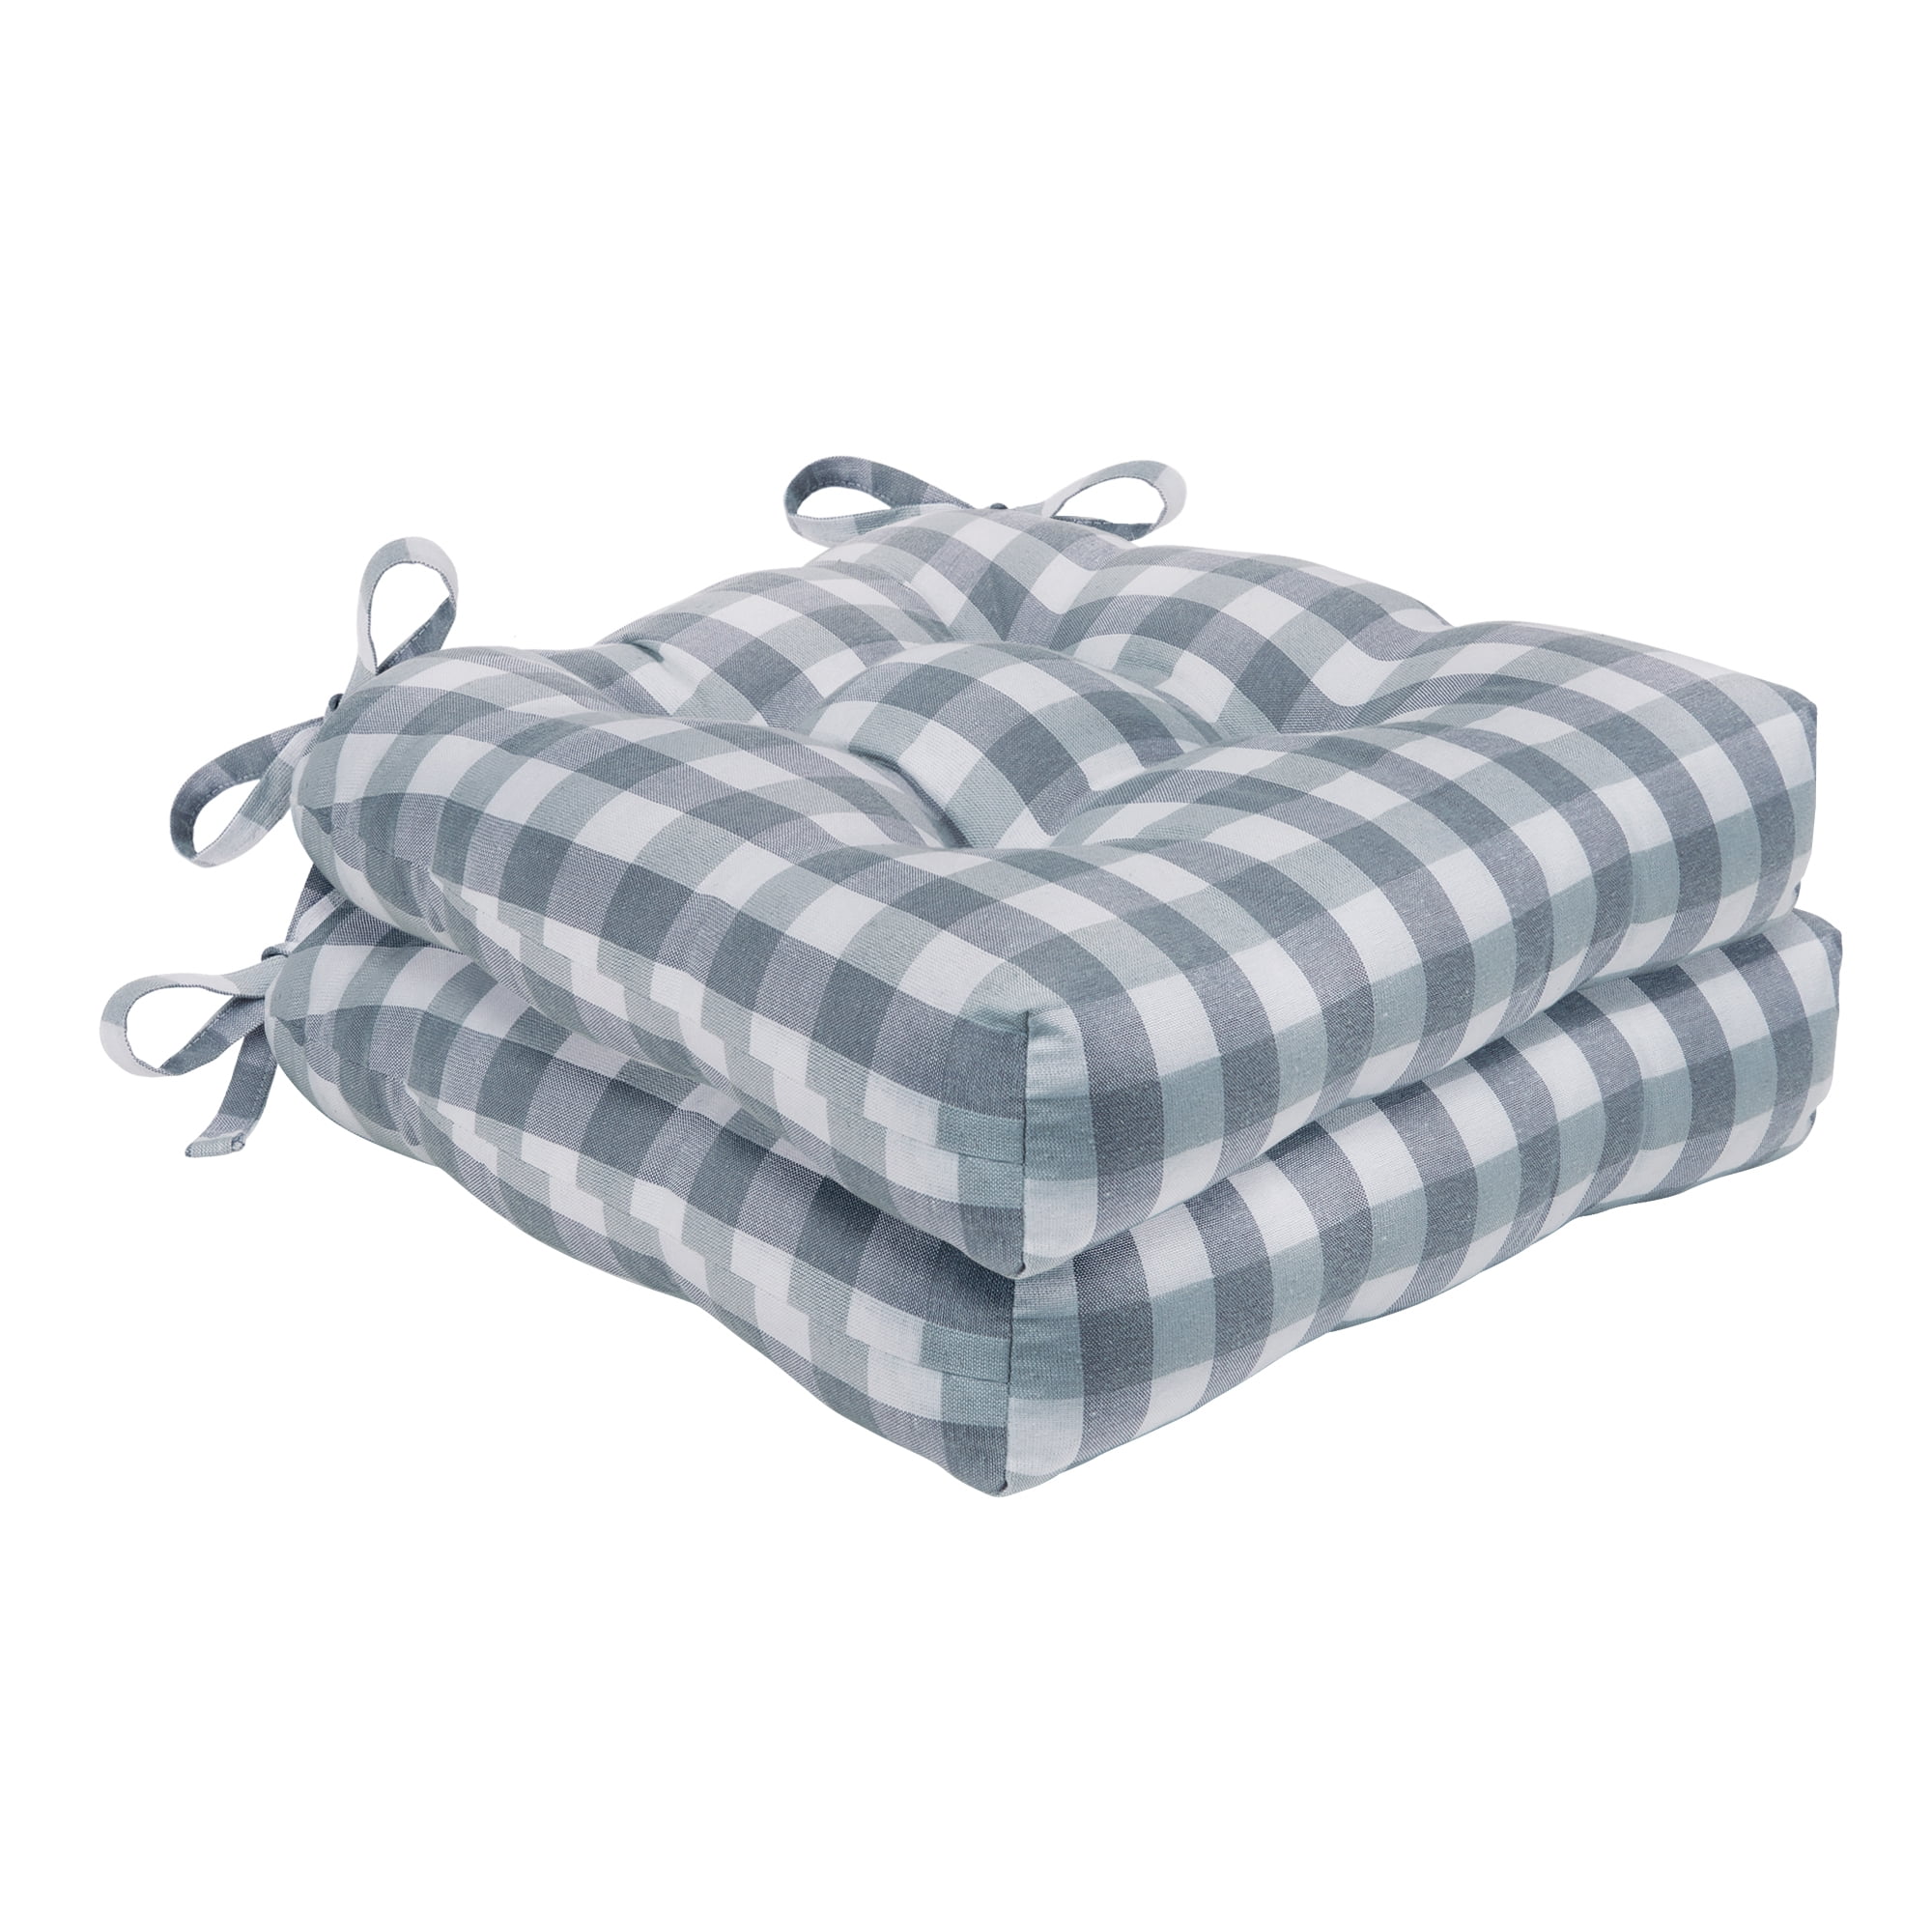 Choose Size Gray Plaid Tufted Seat Cushion w/ Ties for Kitchen Dining Chair 